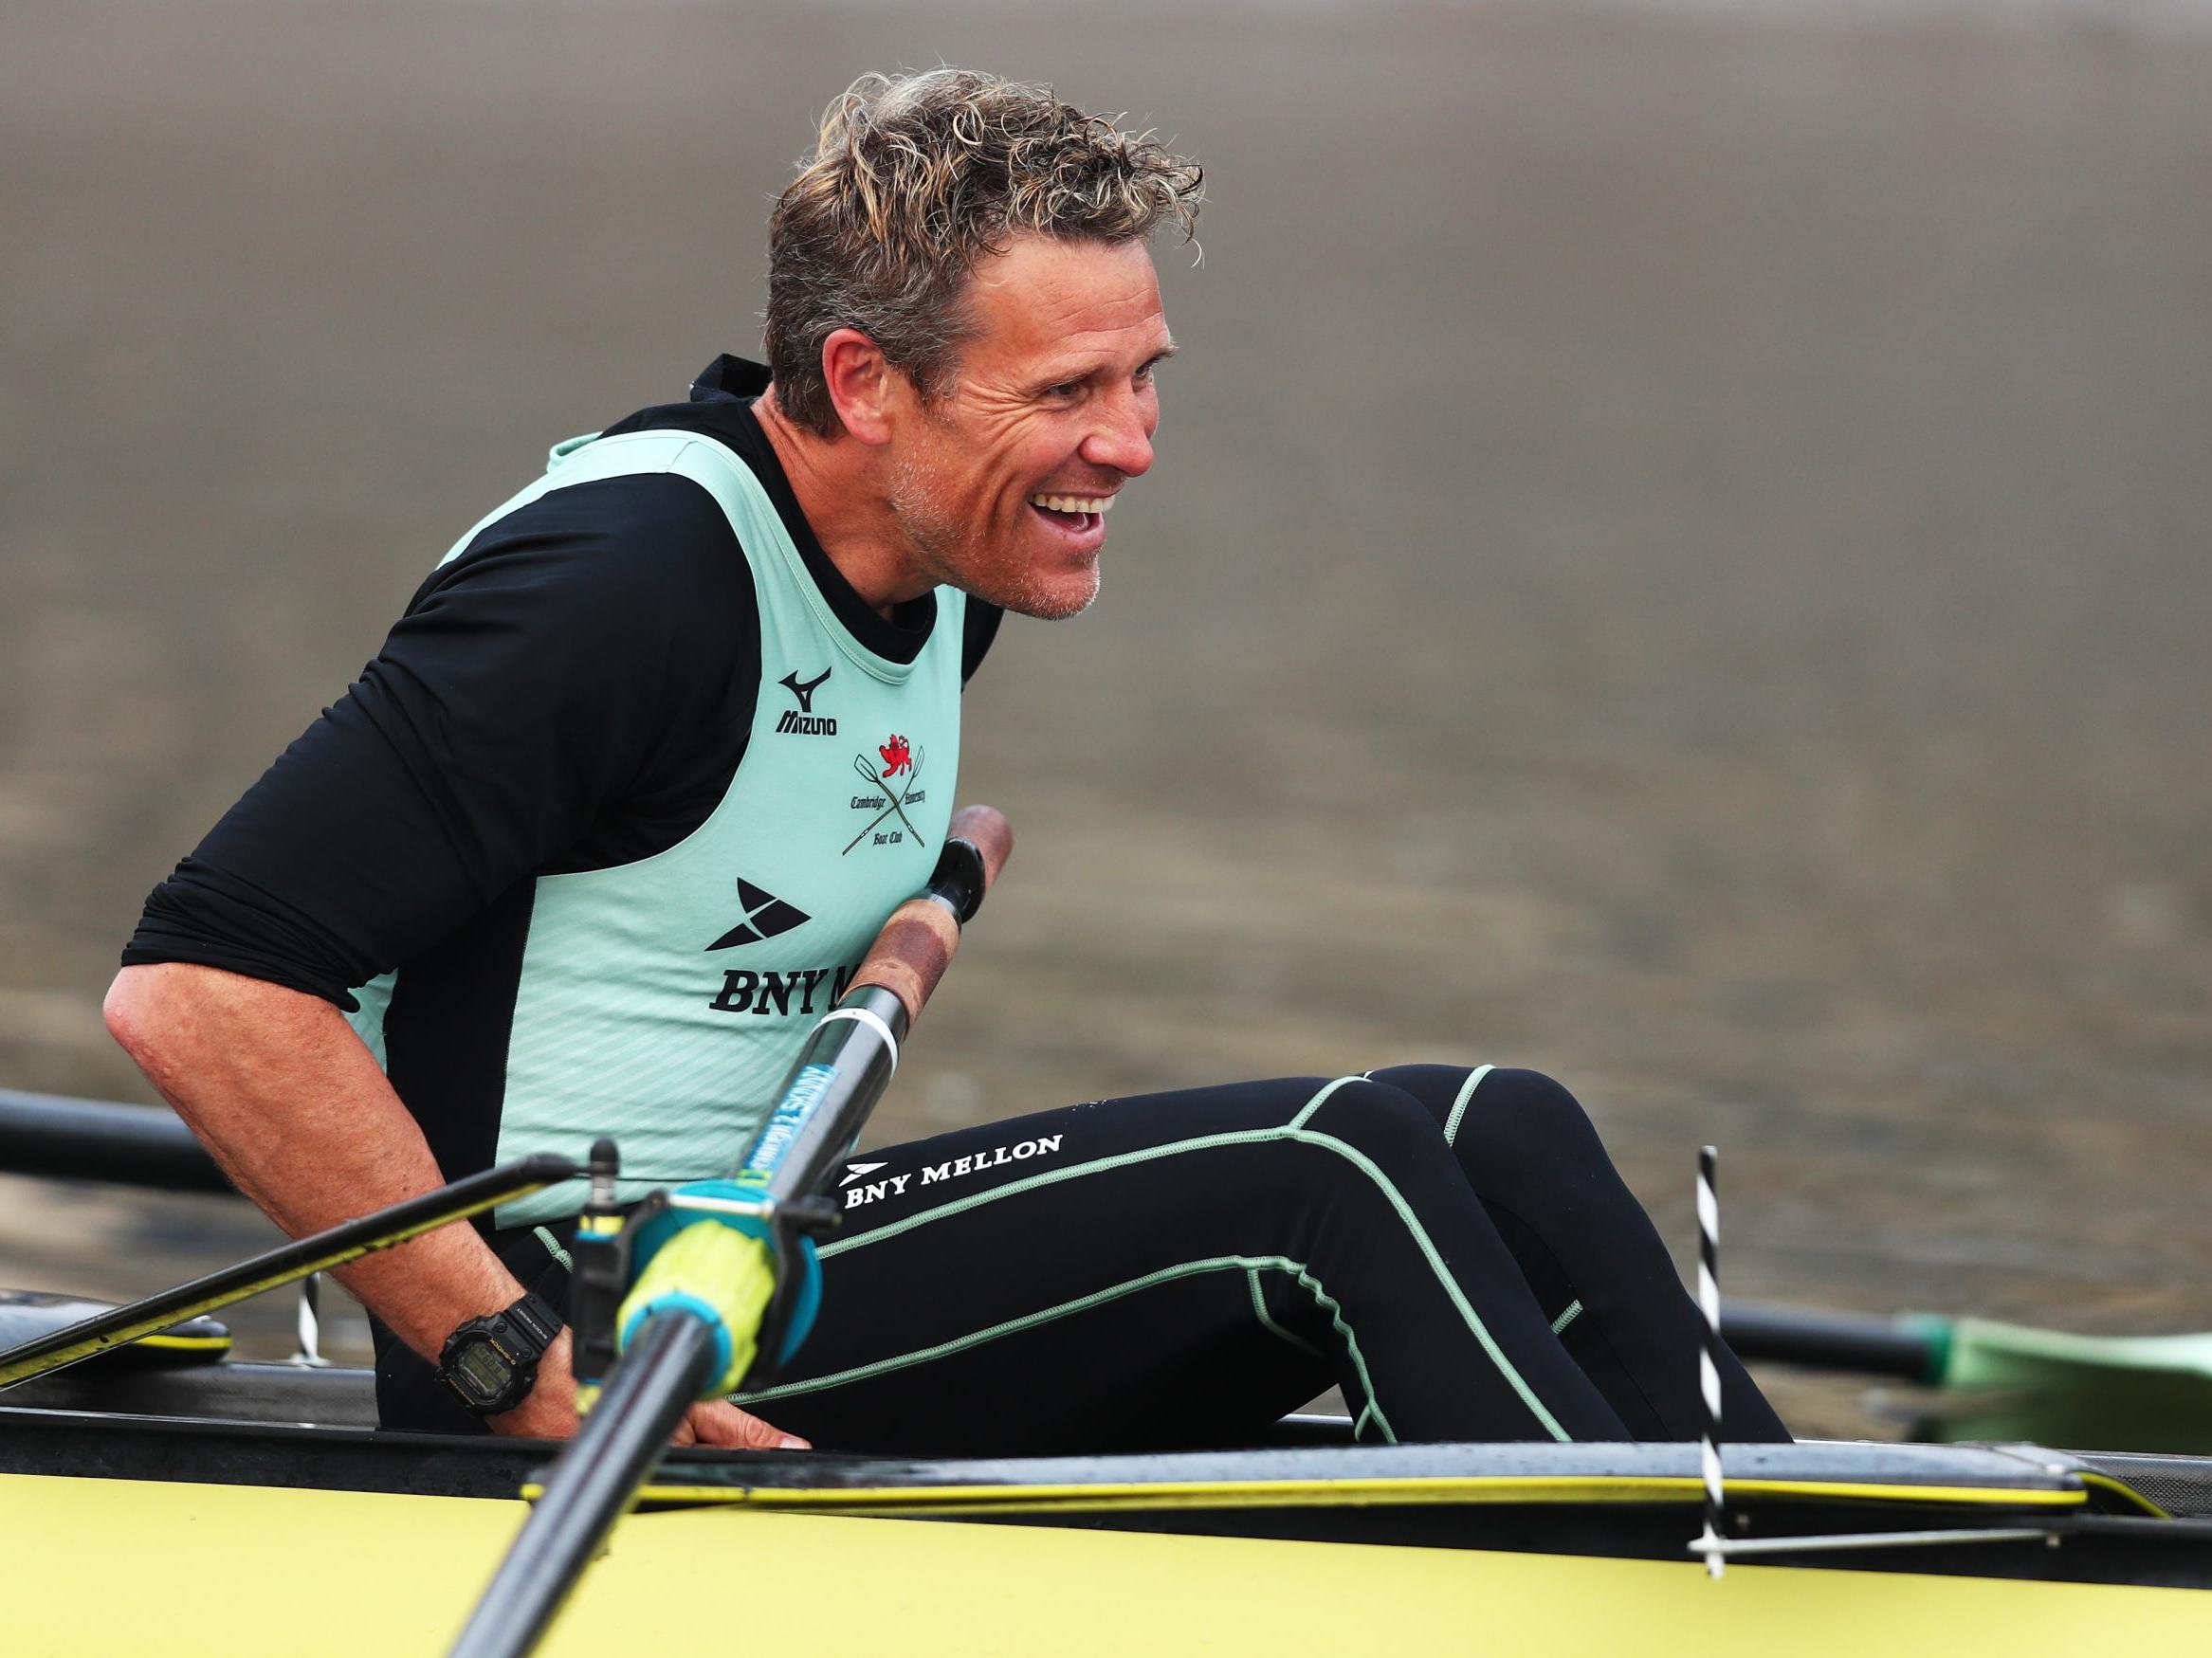 The 46-year-old, who won gold medals in the coxless four at the 2000 and 2004 Olympic Games, is almost 25 years older than some of his team-mates